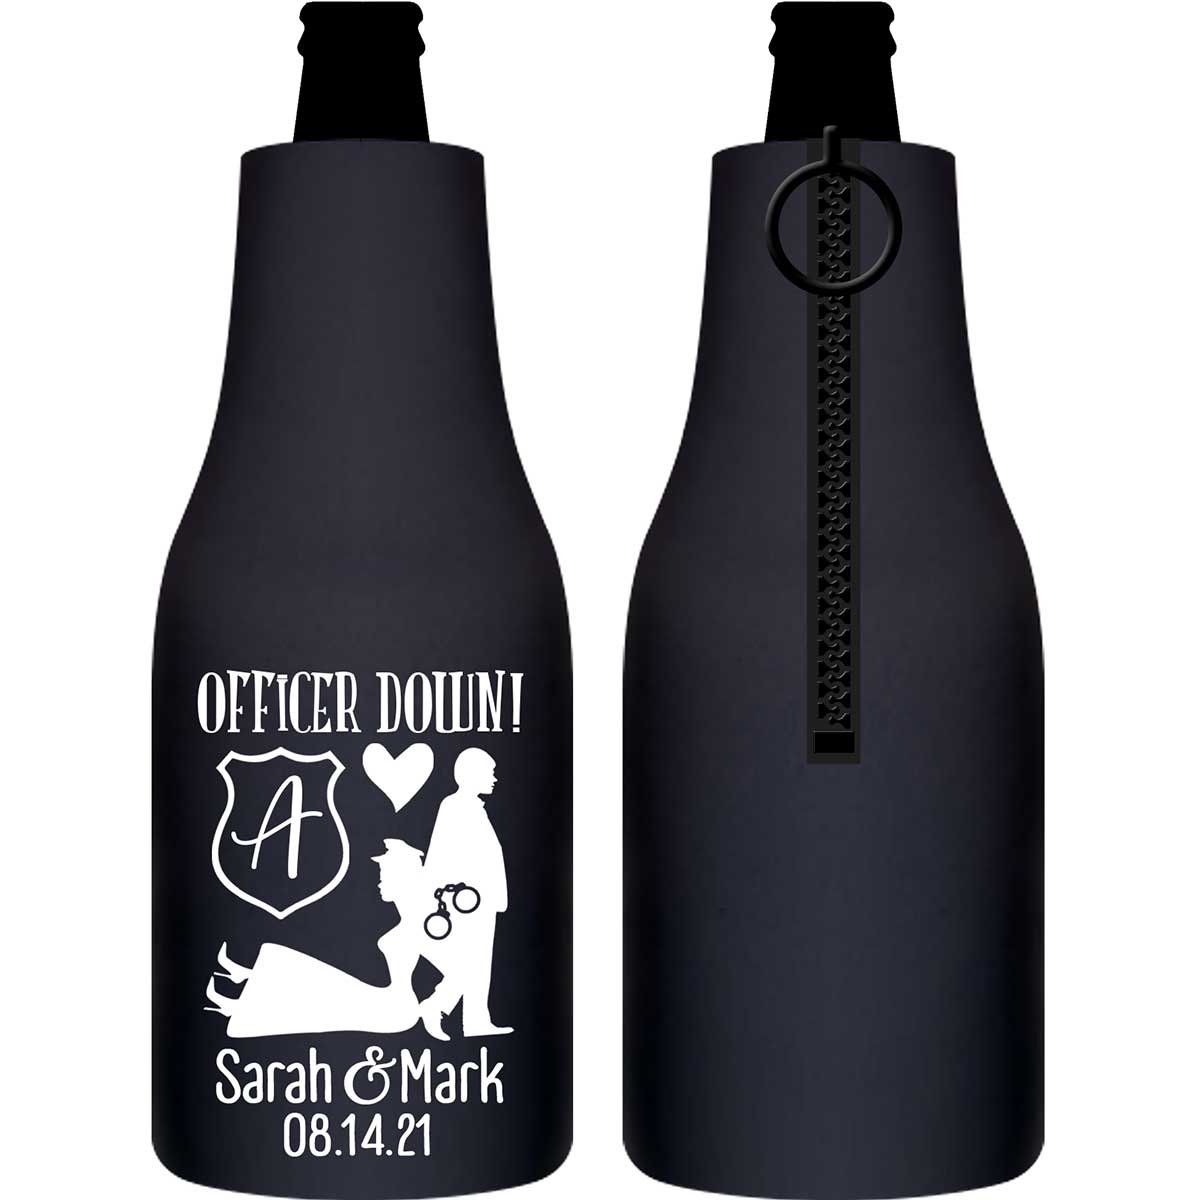 Officer Down 1B Policewoman Wedding Foldable Zippered Bottle Koozies Wedding Gifts for Guests